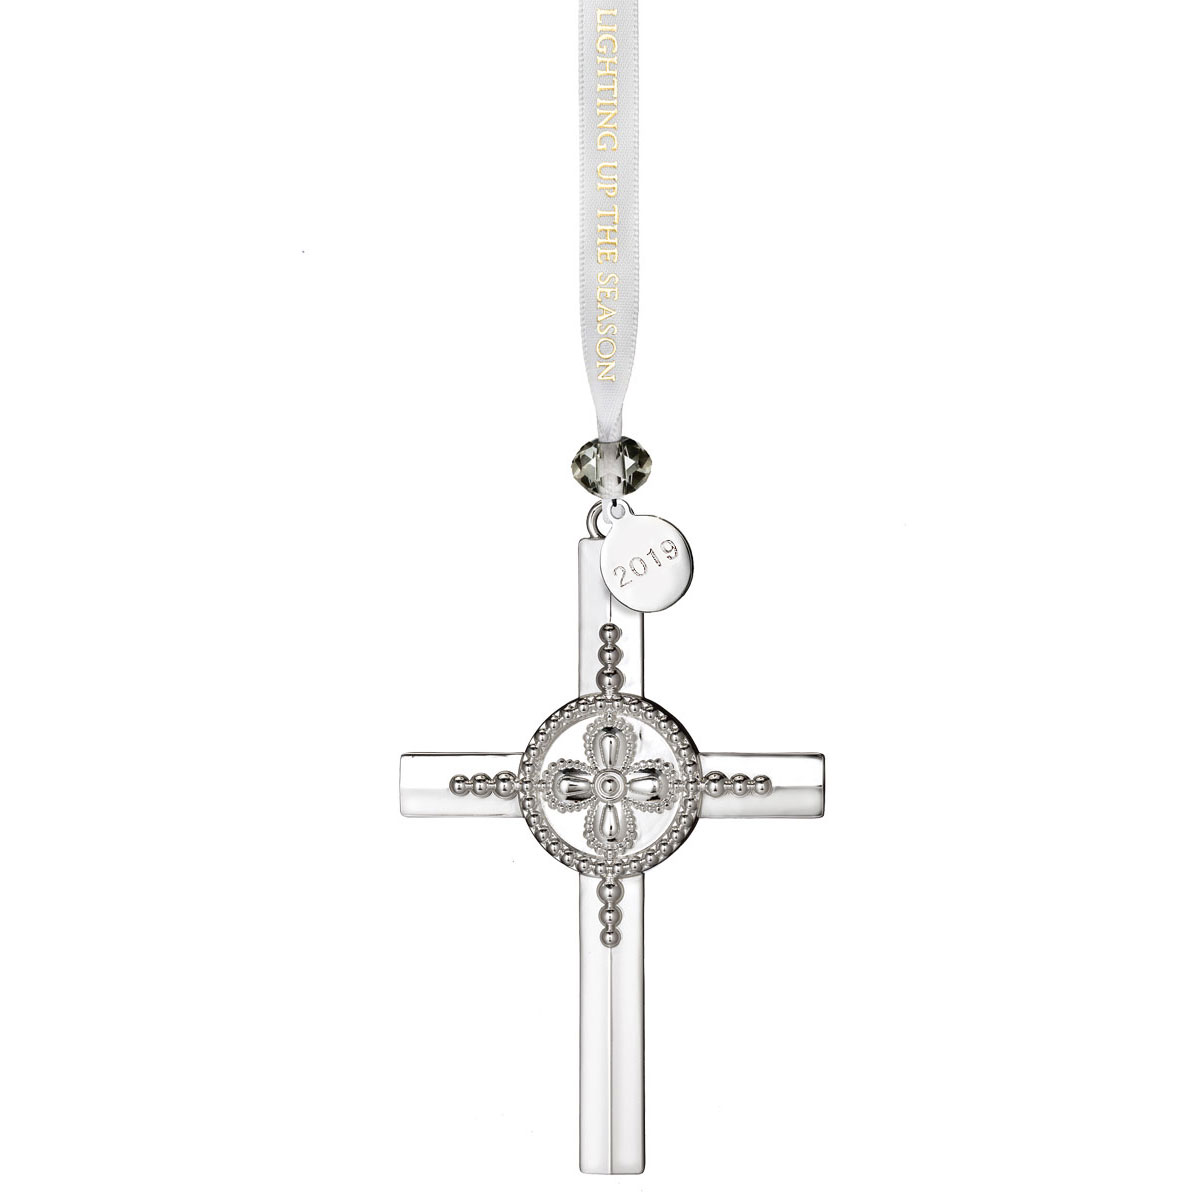 Waterford 2019 Silver Cross Ornament